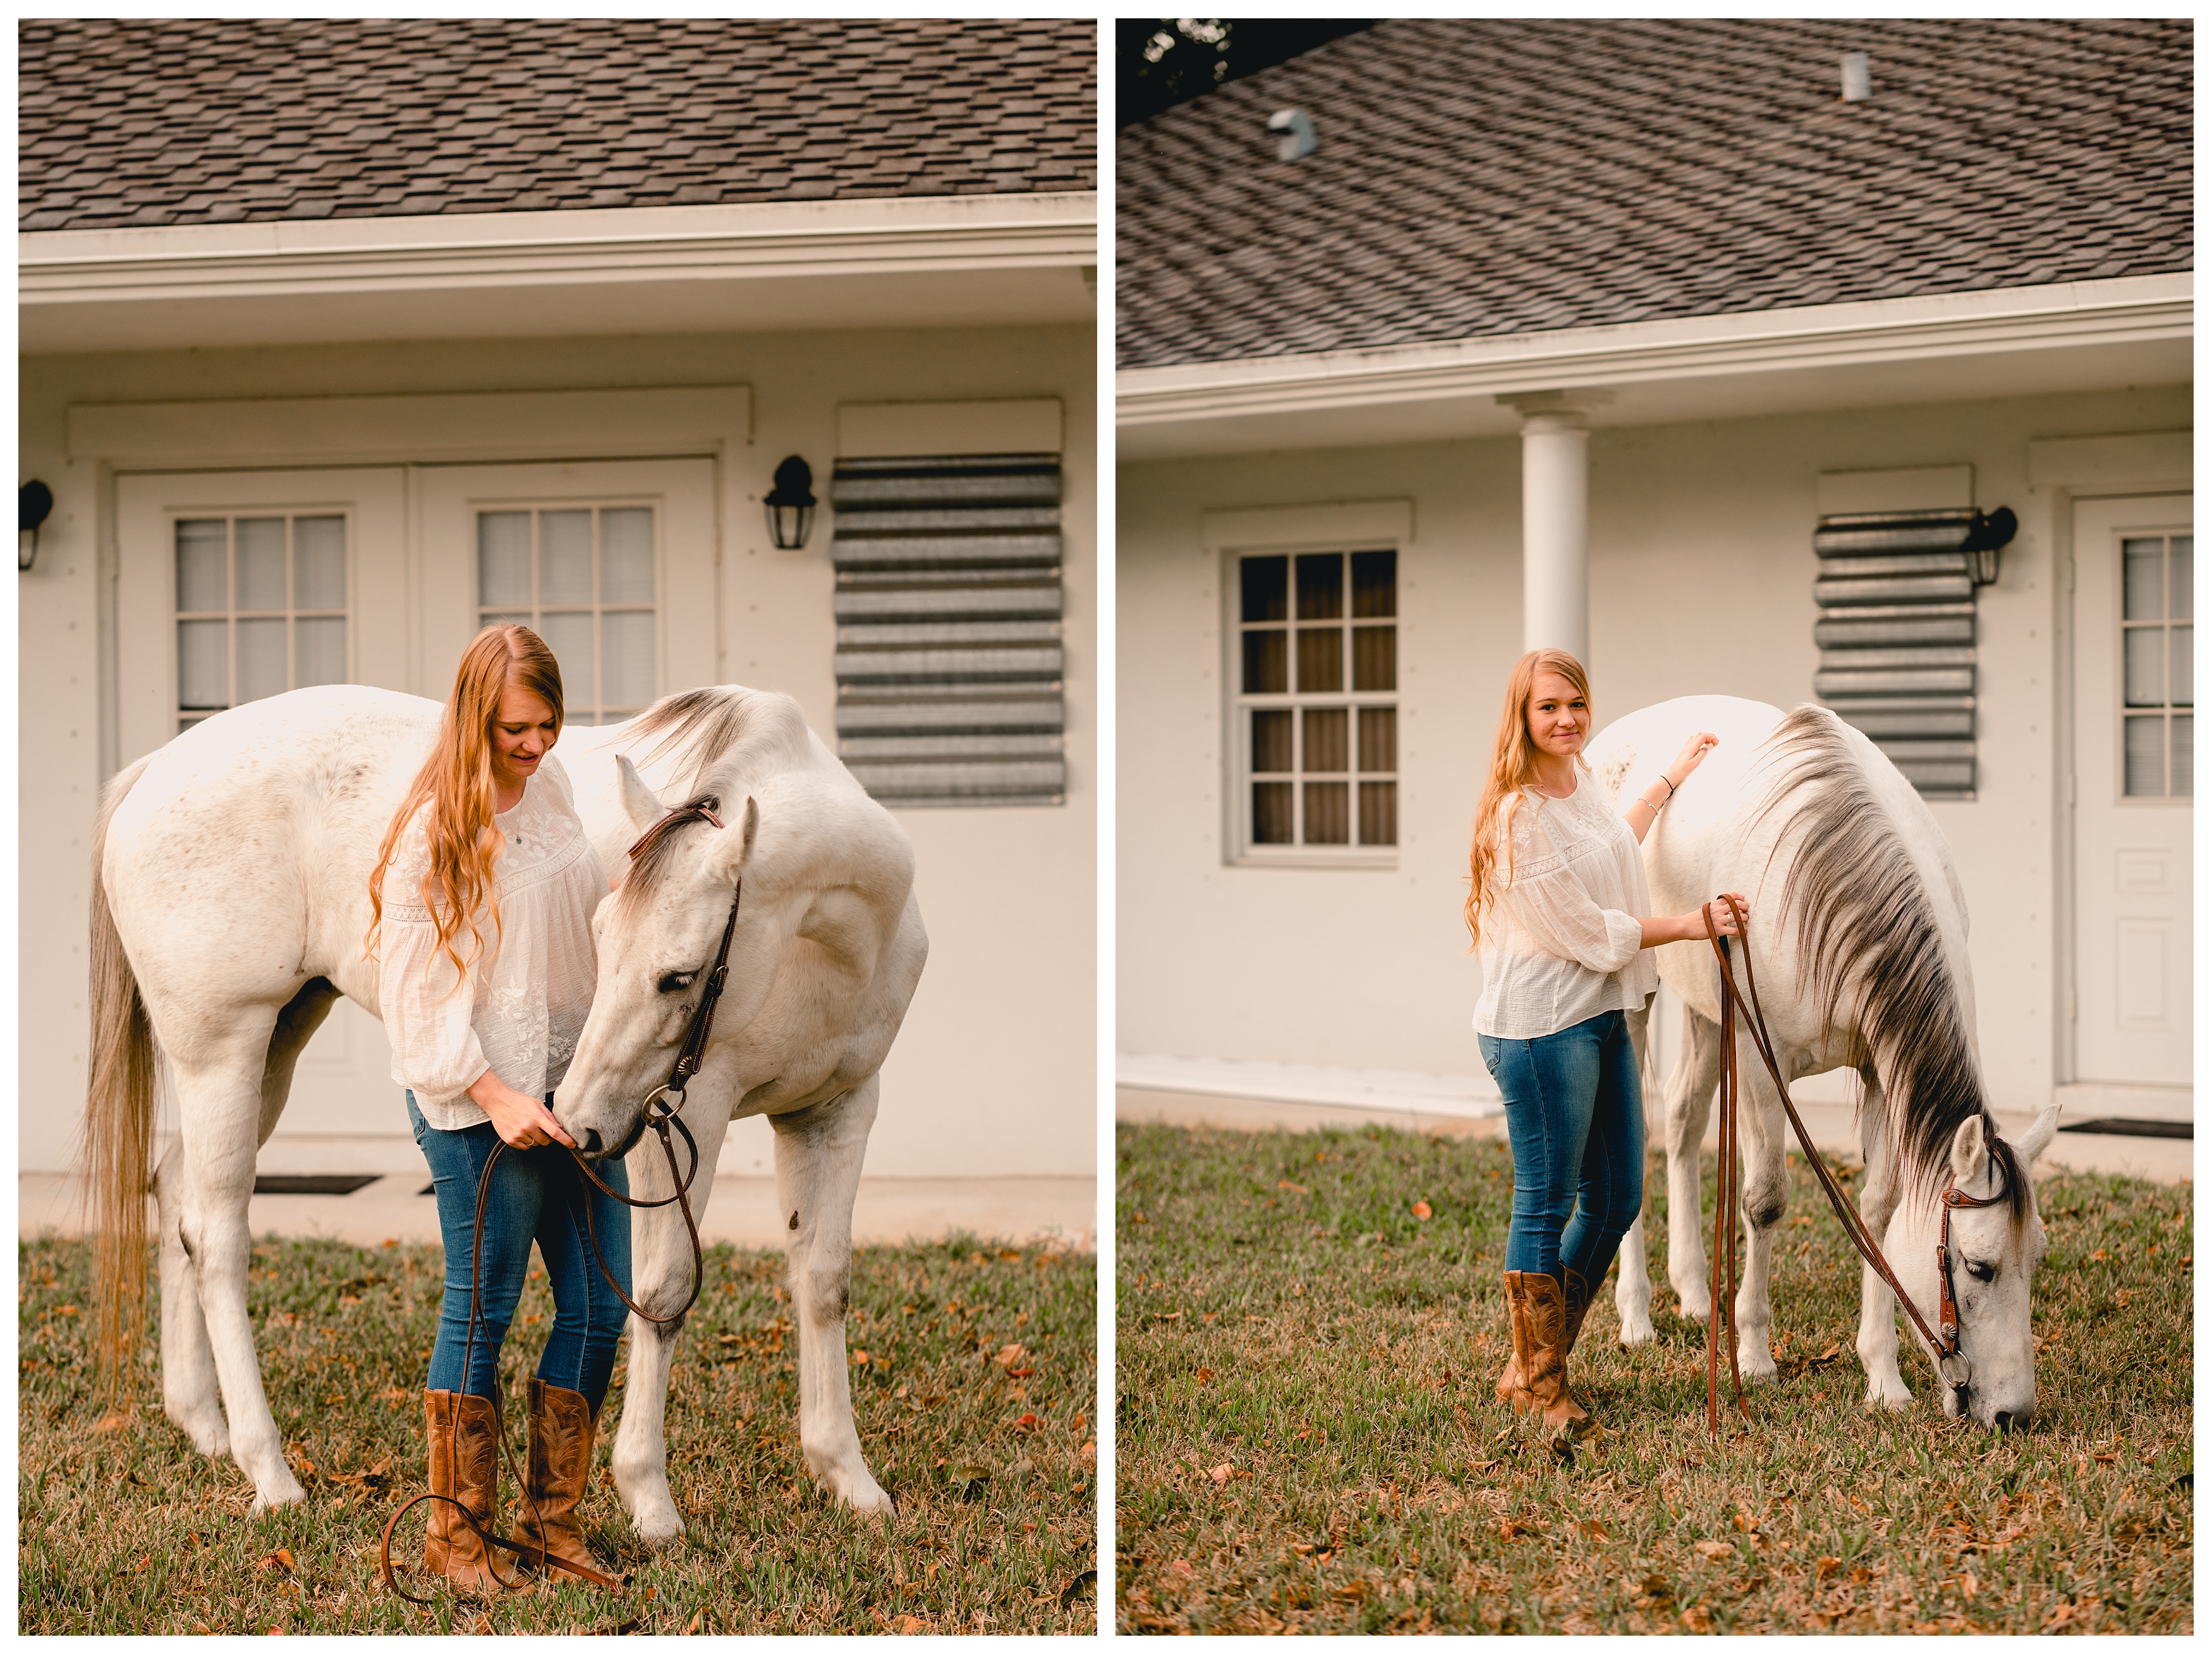 Taking pictures of a horse and rider in Wellington, Florida. Shelly Williams Photography